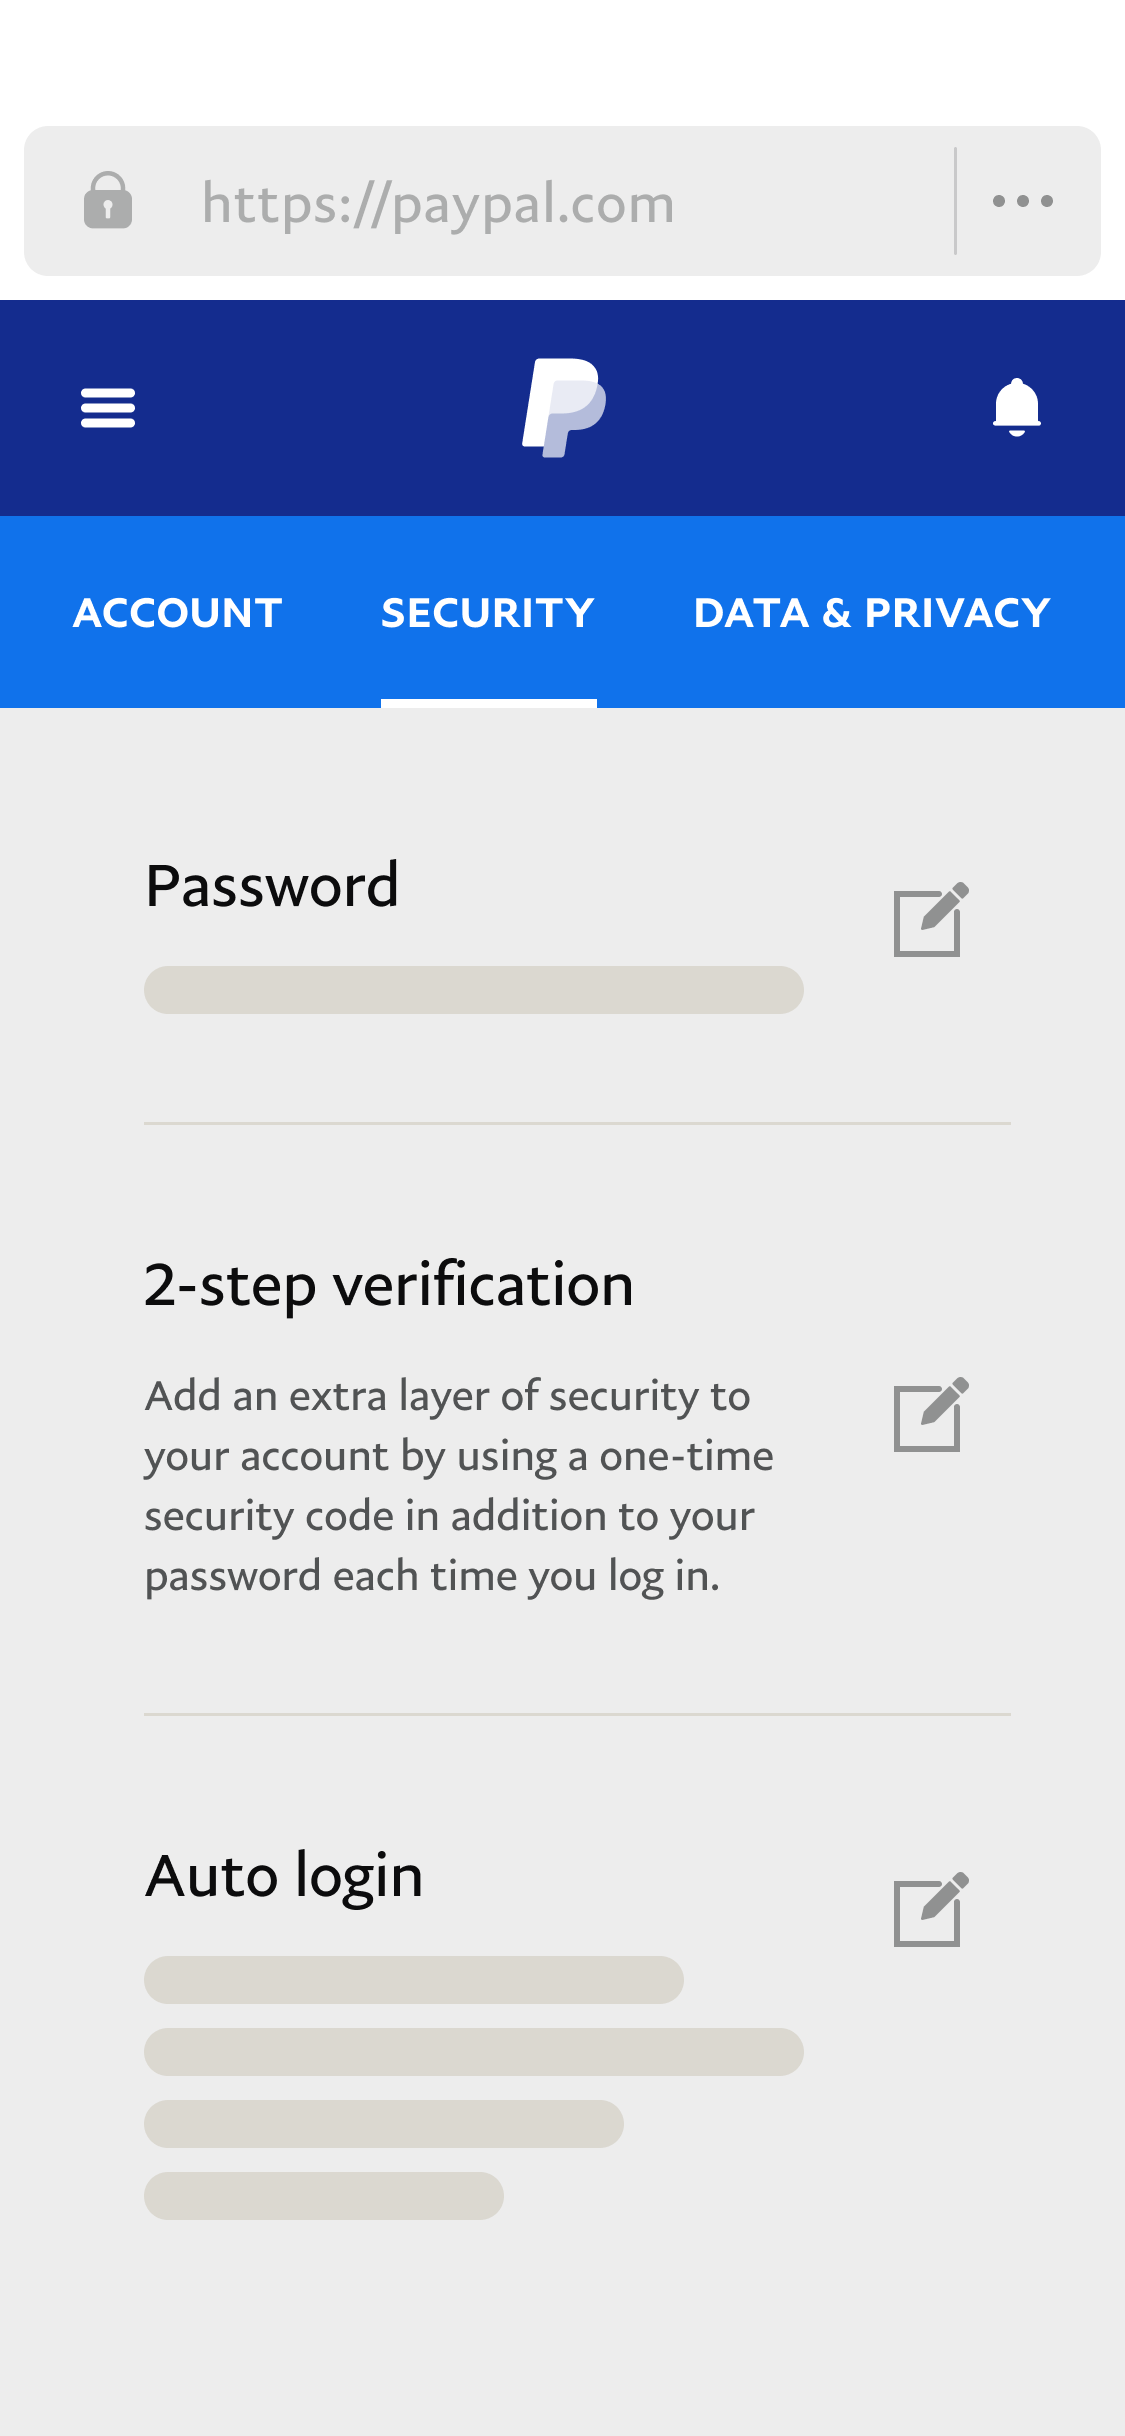 An illustration of the Security settings page in the PayPal app showing the 2-step verification setting